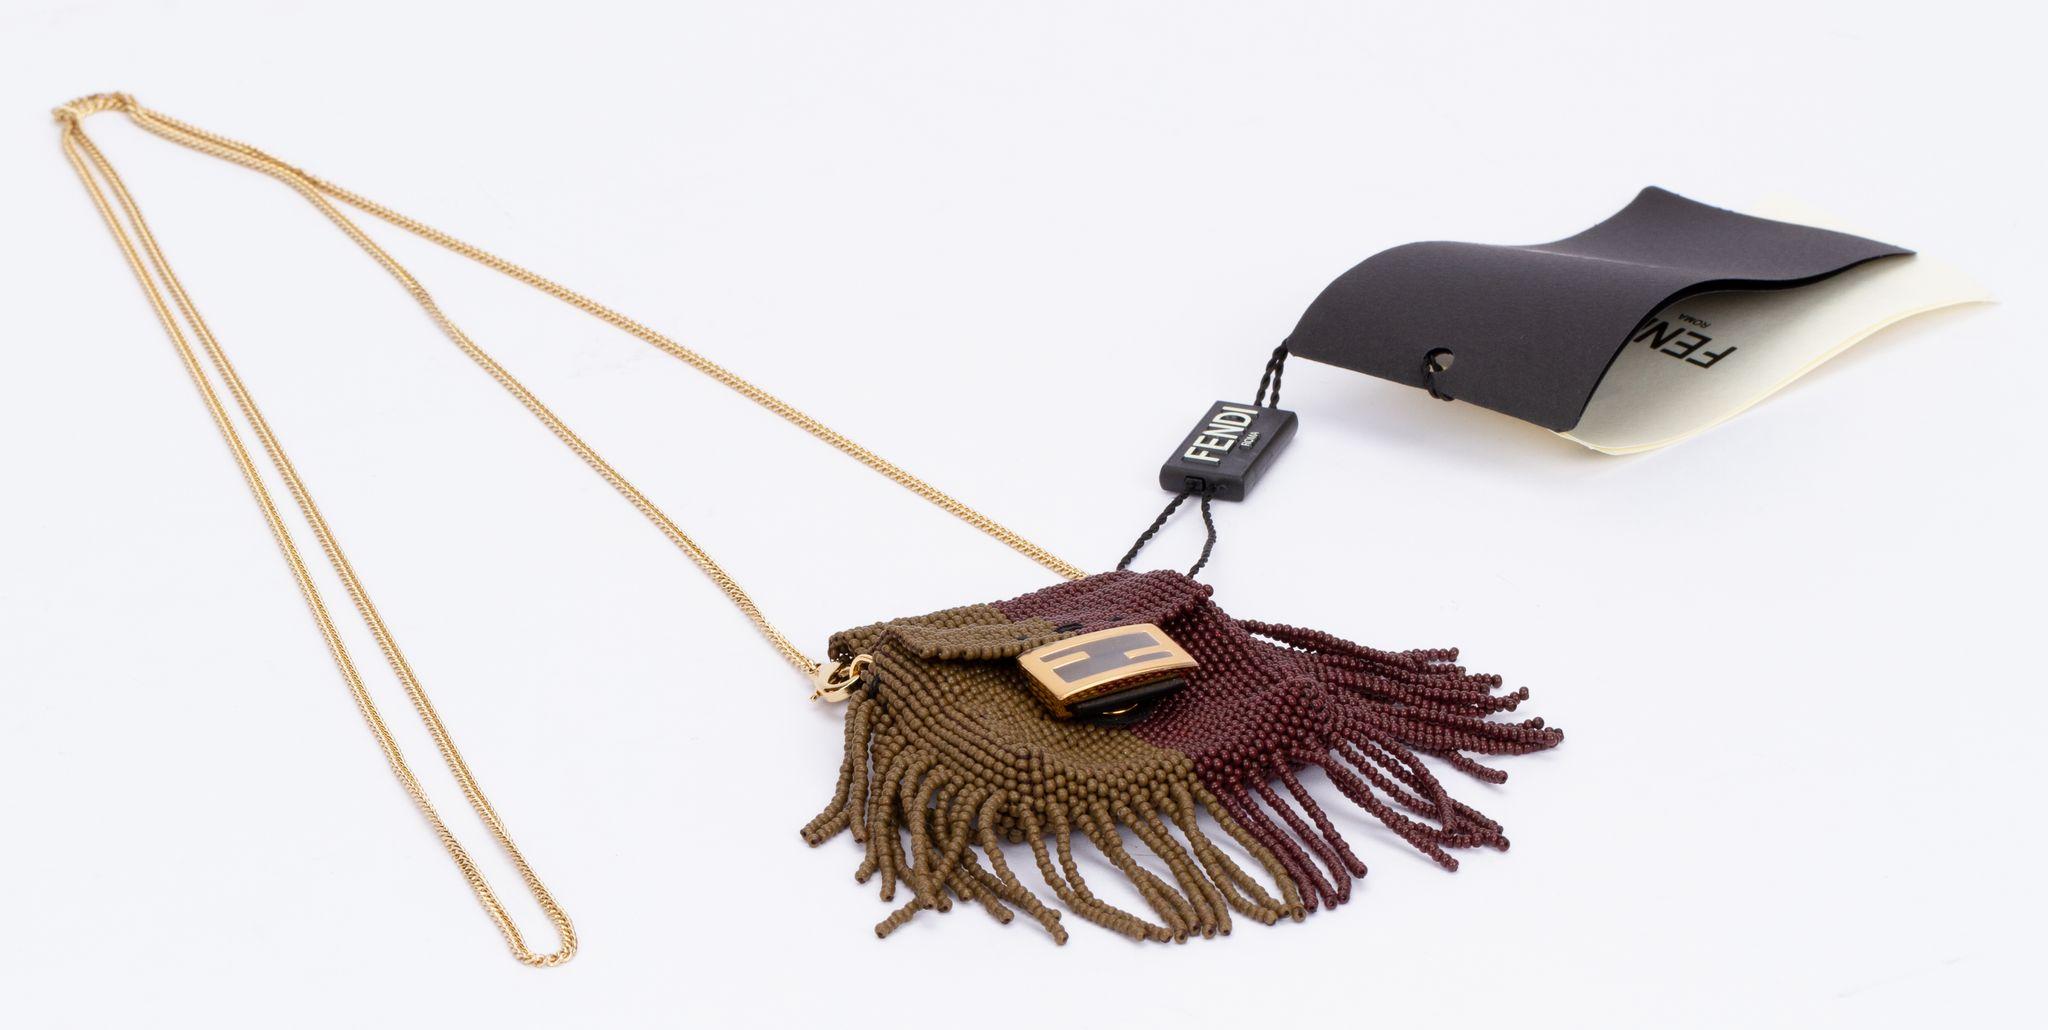 Fendi micro necklace baguette with tassels. The bag is made of beaded fabric in the colors brown and olive. Attached on it are tassels. The piece can be worn as a necklace as well as a mini bag or be attached to a bigger bag. The chain is detachable